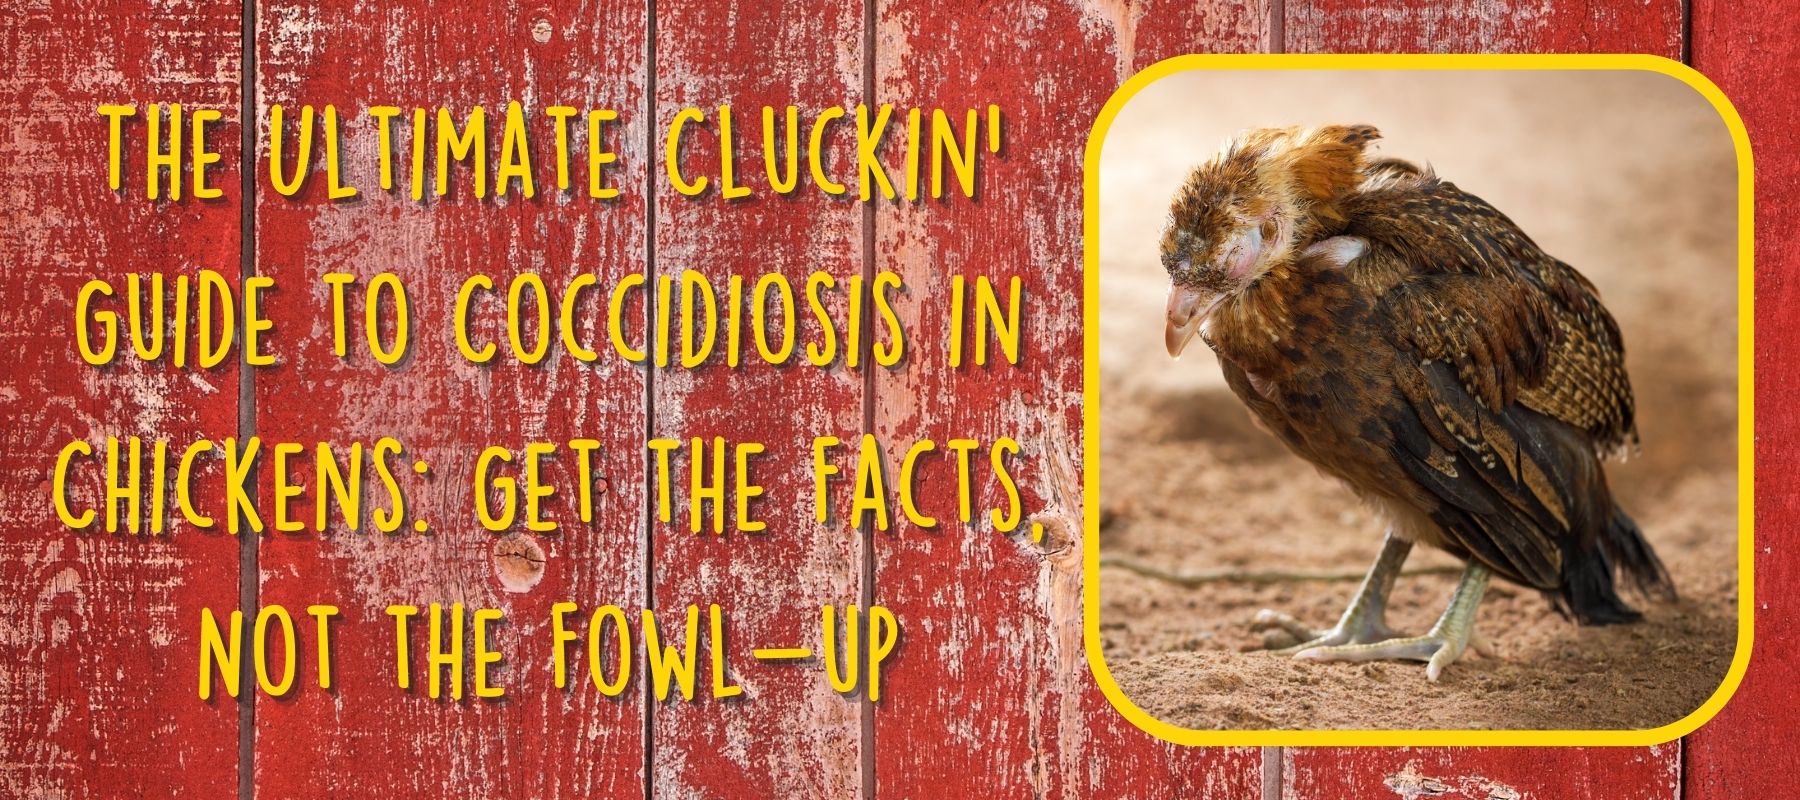 The Ultimate Cluckin' Guide to Coccidiosis in Chickens: Get the Facts, Not the Fowl-up